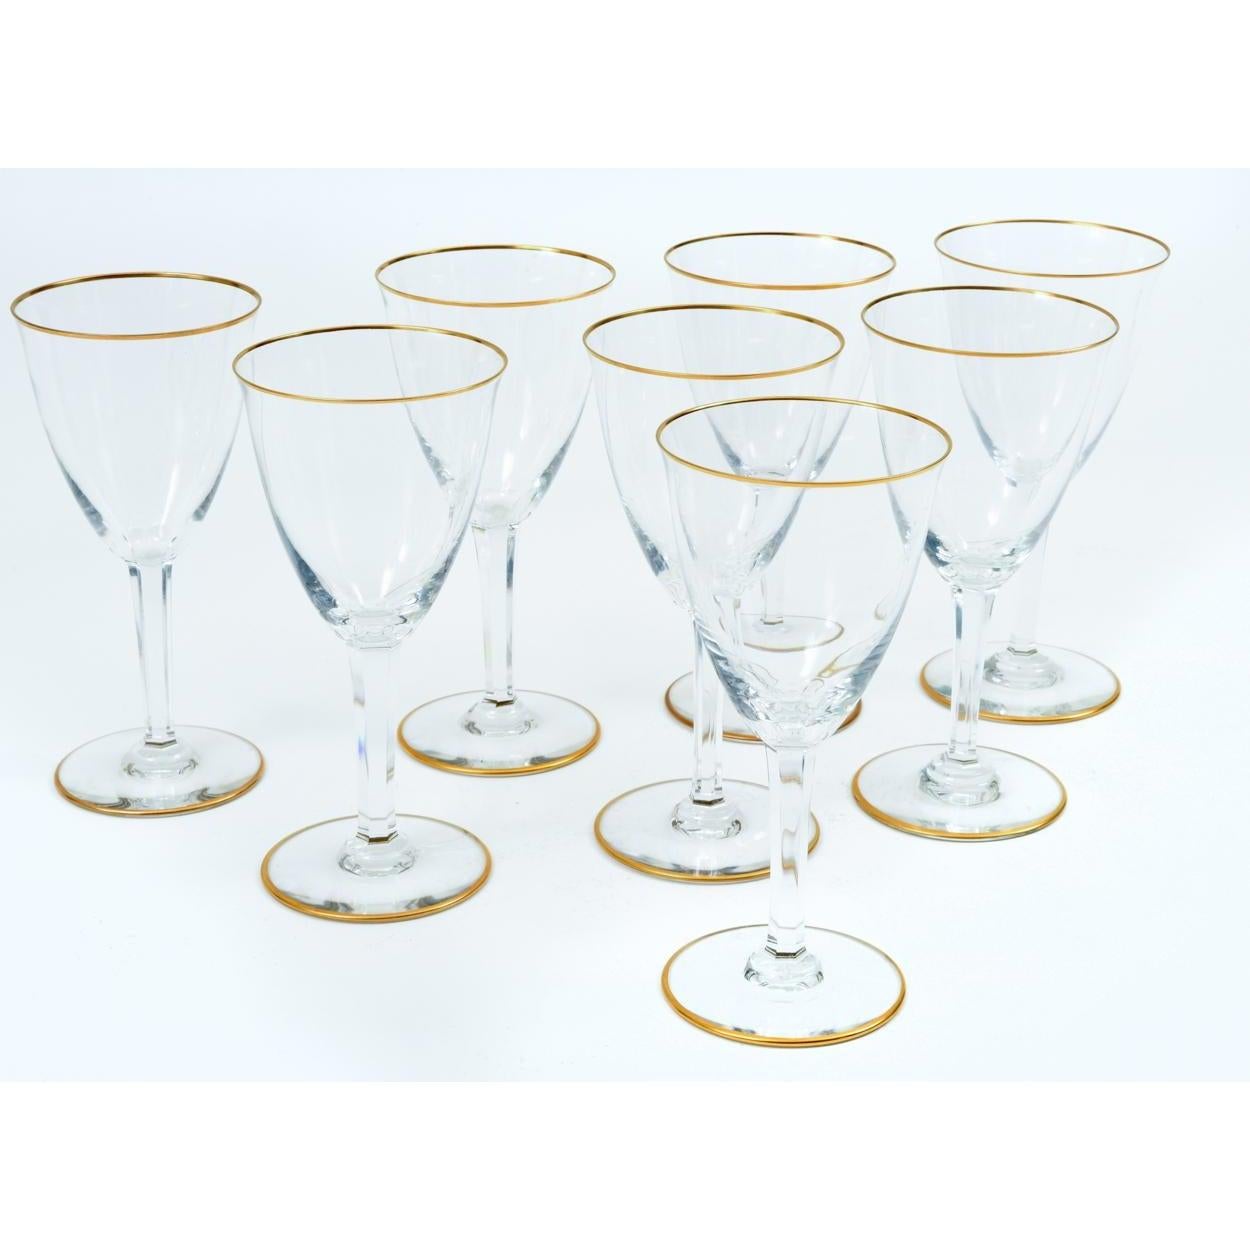 Etched Baccarat Crystal Barware / Tableware Wine Service / 8 People For Sale